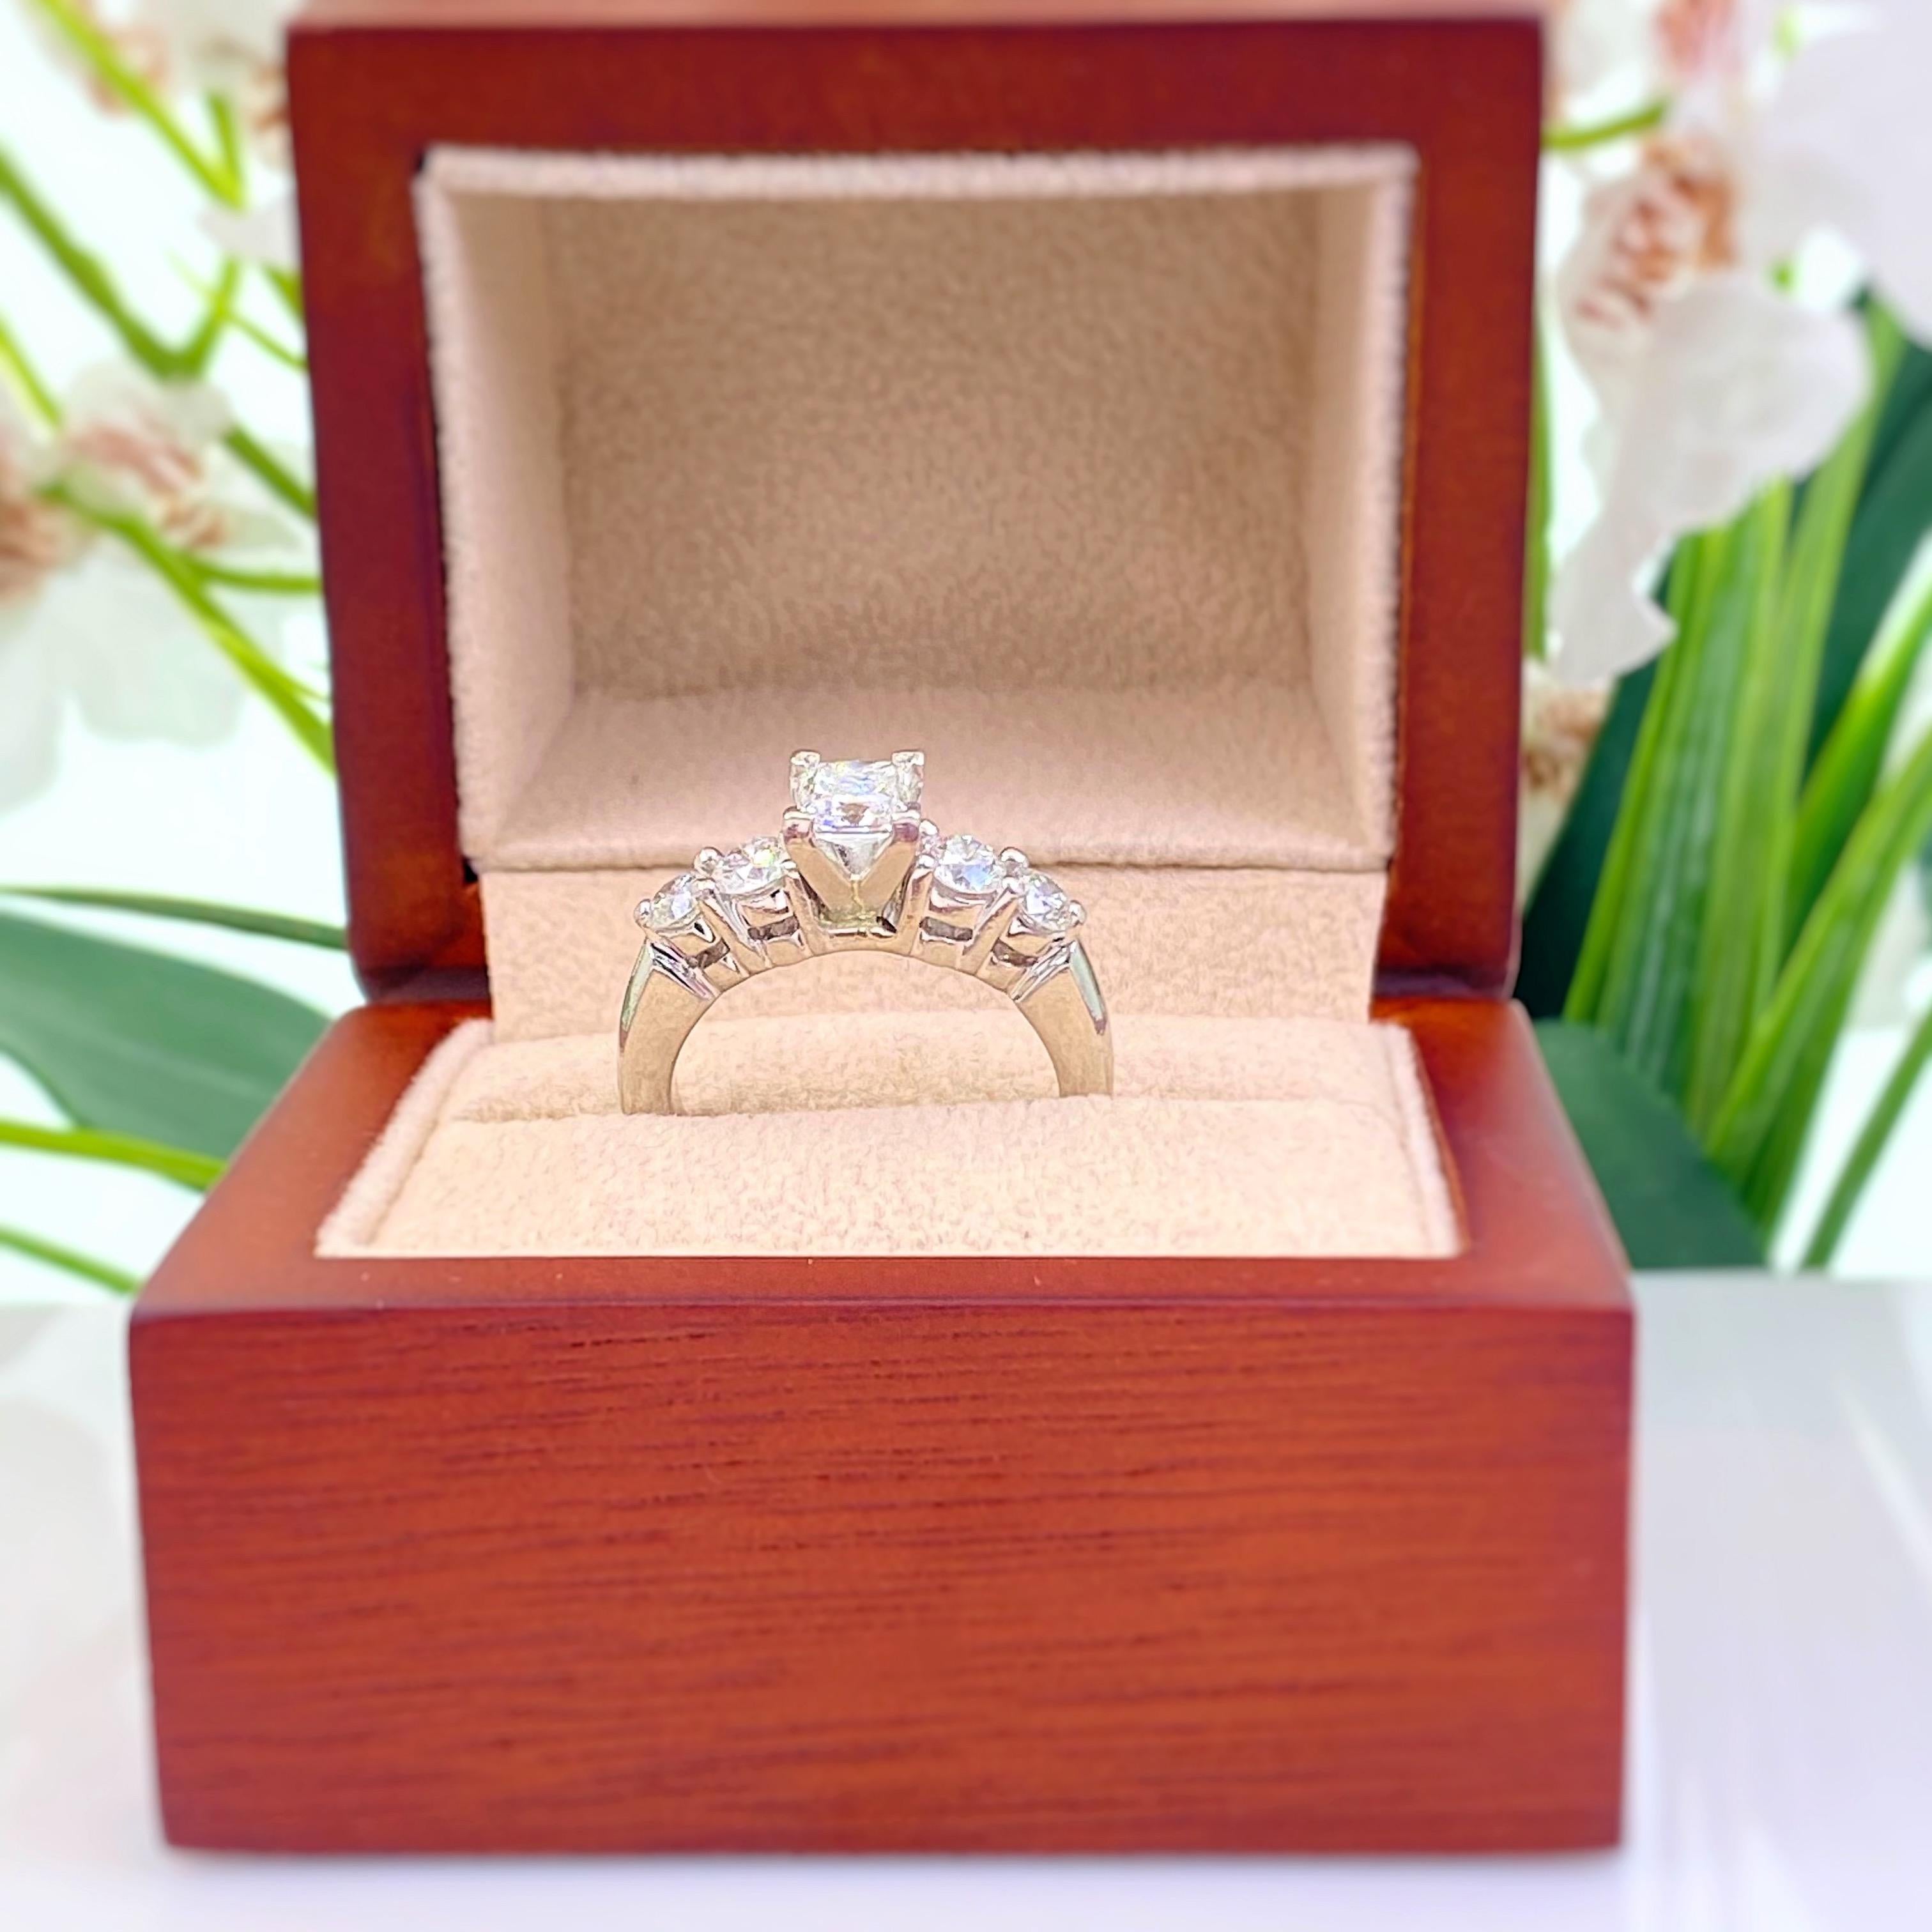 Blue Nile Princess Diamond 1.36 Carat G VS1 Platinum Engagement Ring AGS In Excellent Condition For Sale In San Diego, CA